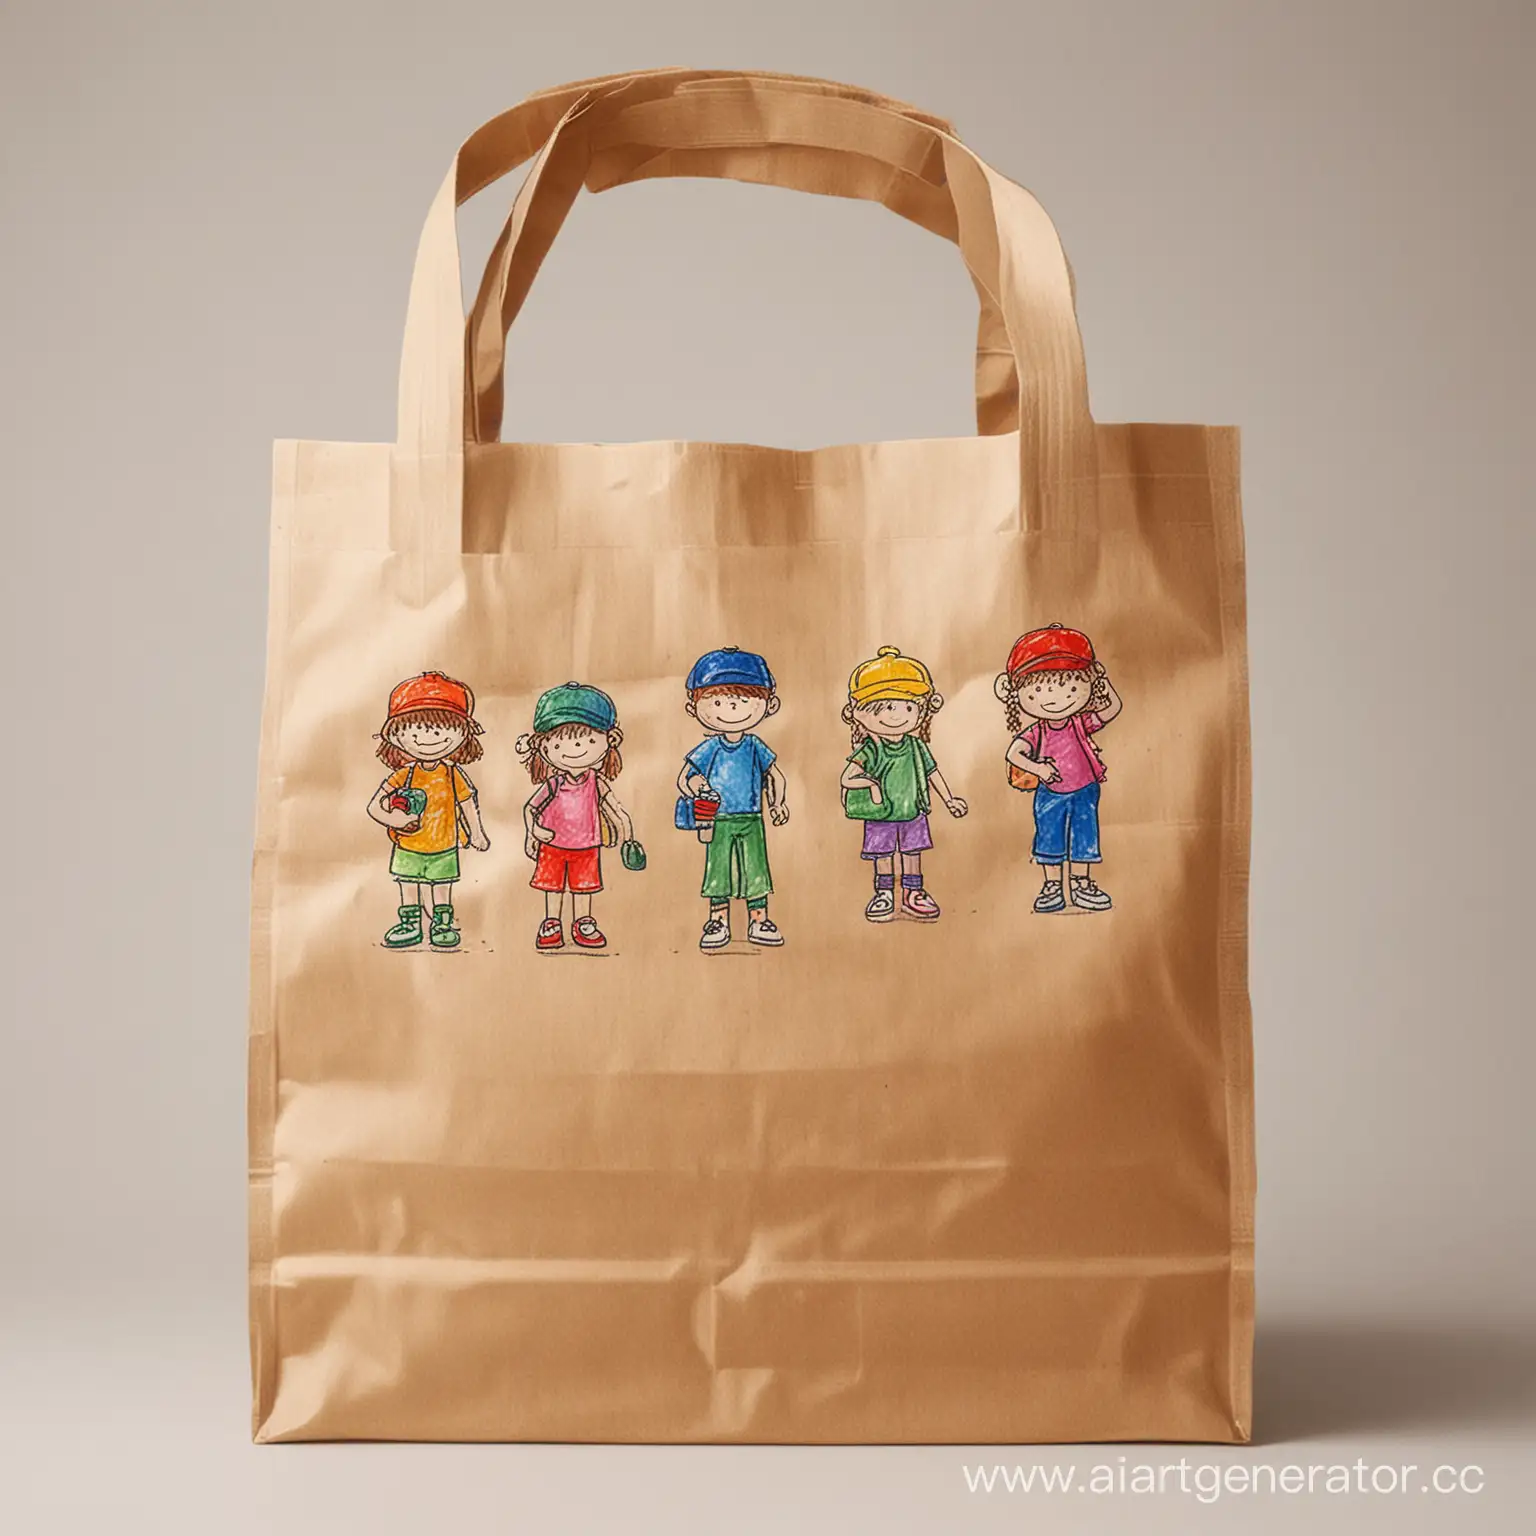 Colorful-Little-People-Emerging-from-Open-Food-Delivery-Bag